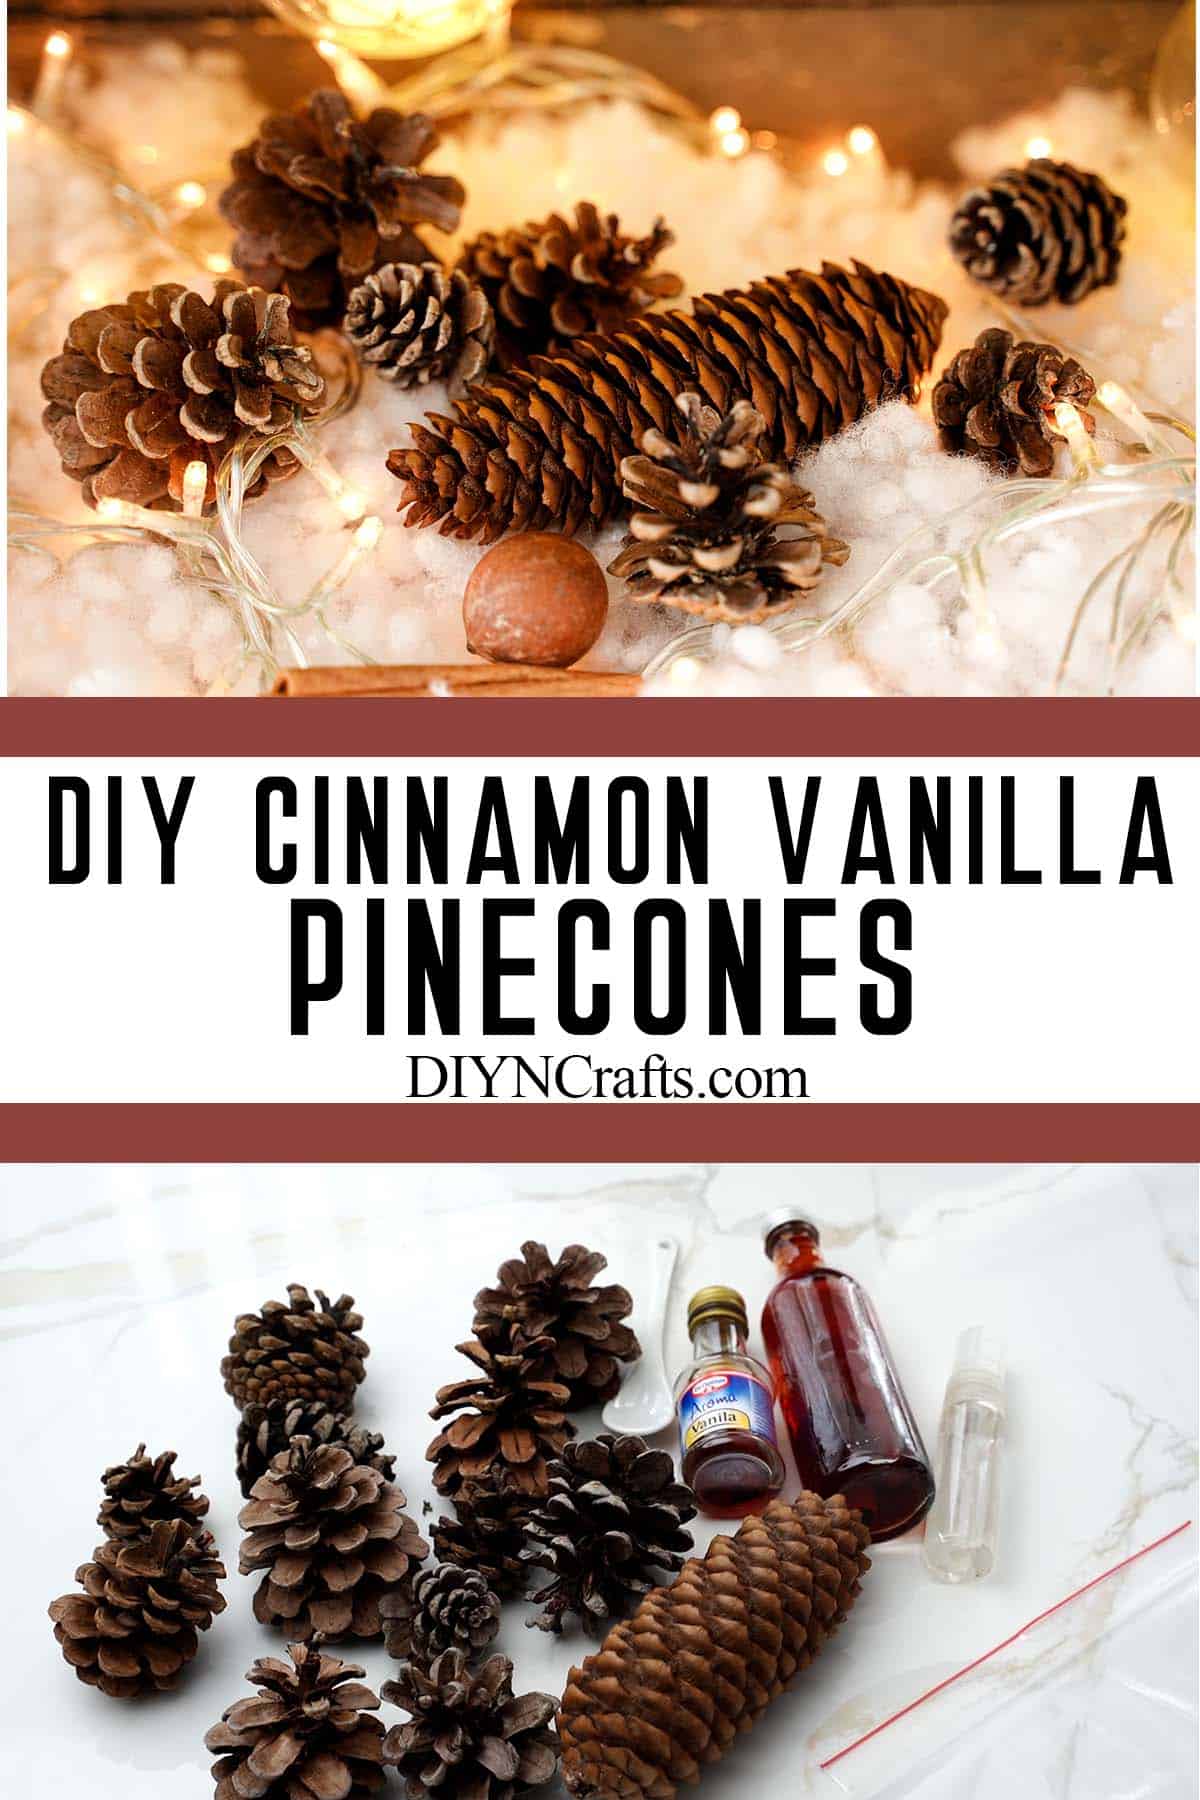 photo collage of fragrant pinecones with text which reads diy cinnamon vanilla pinecones